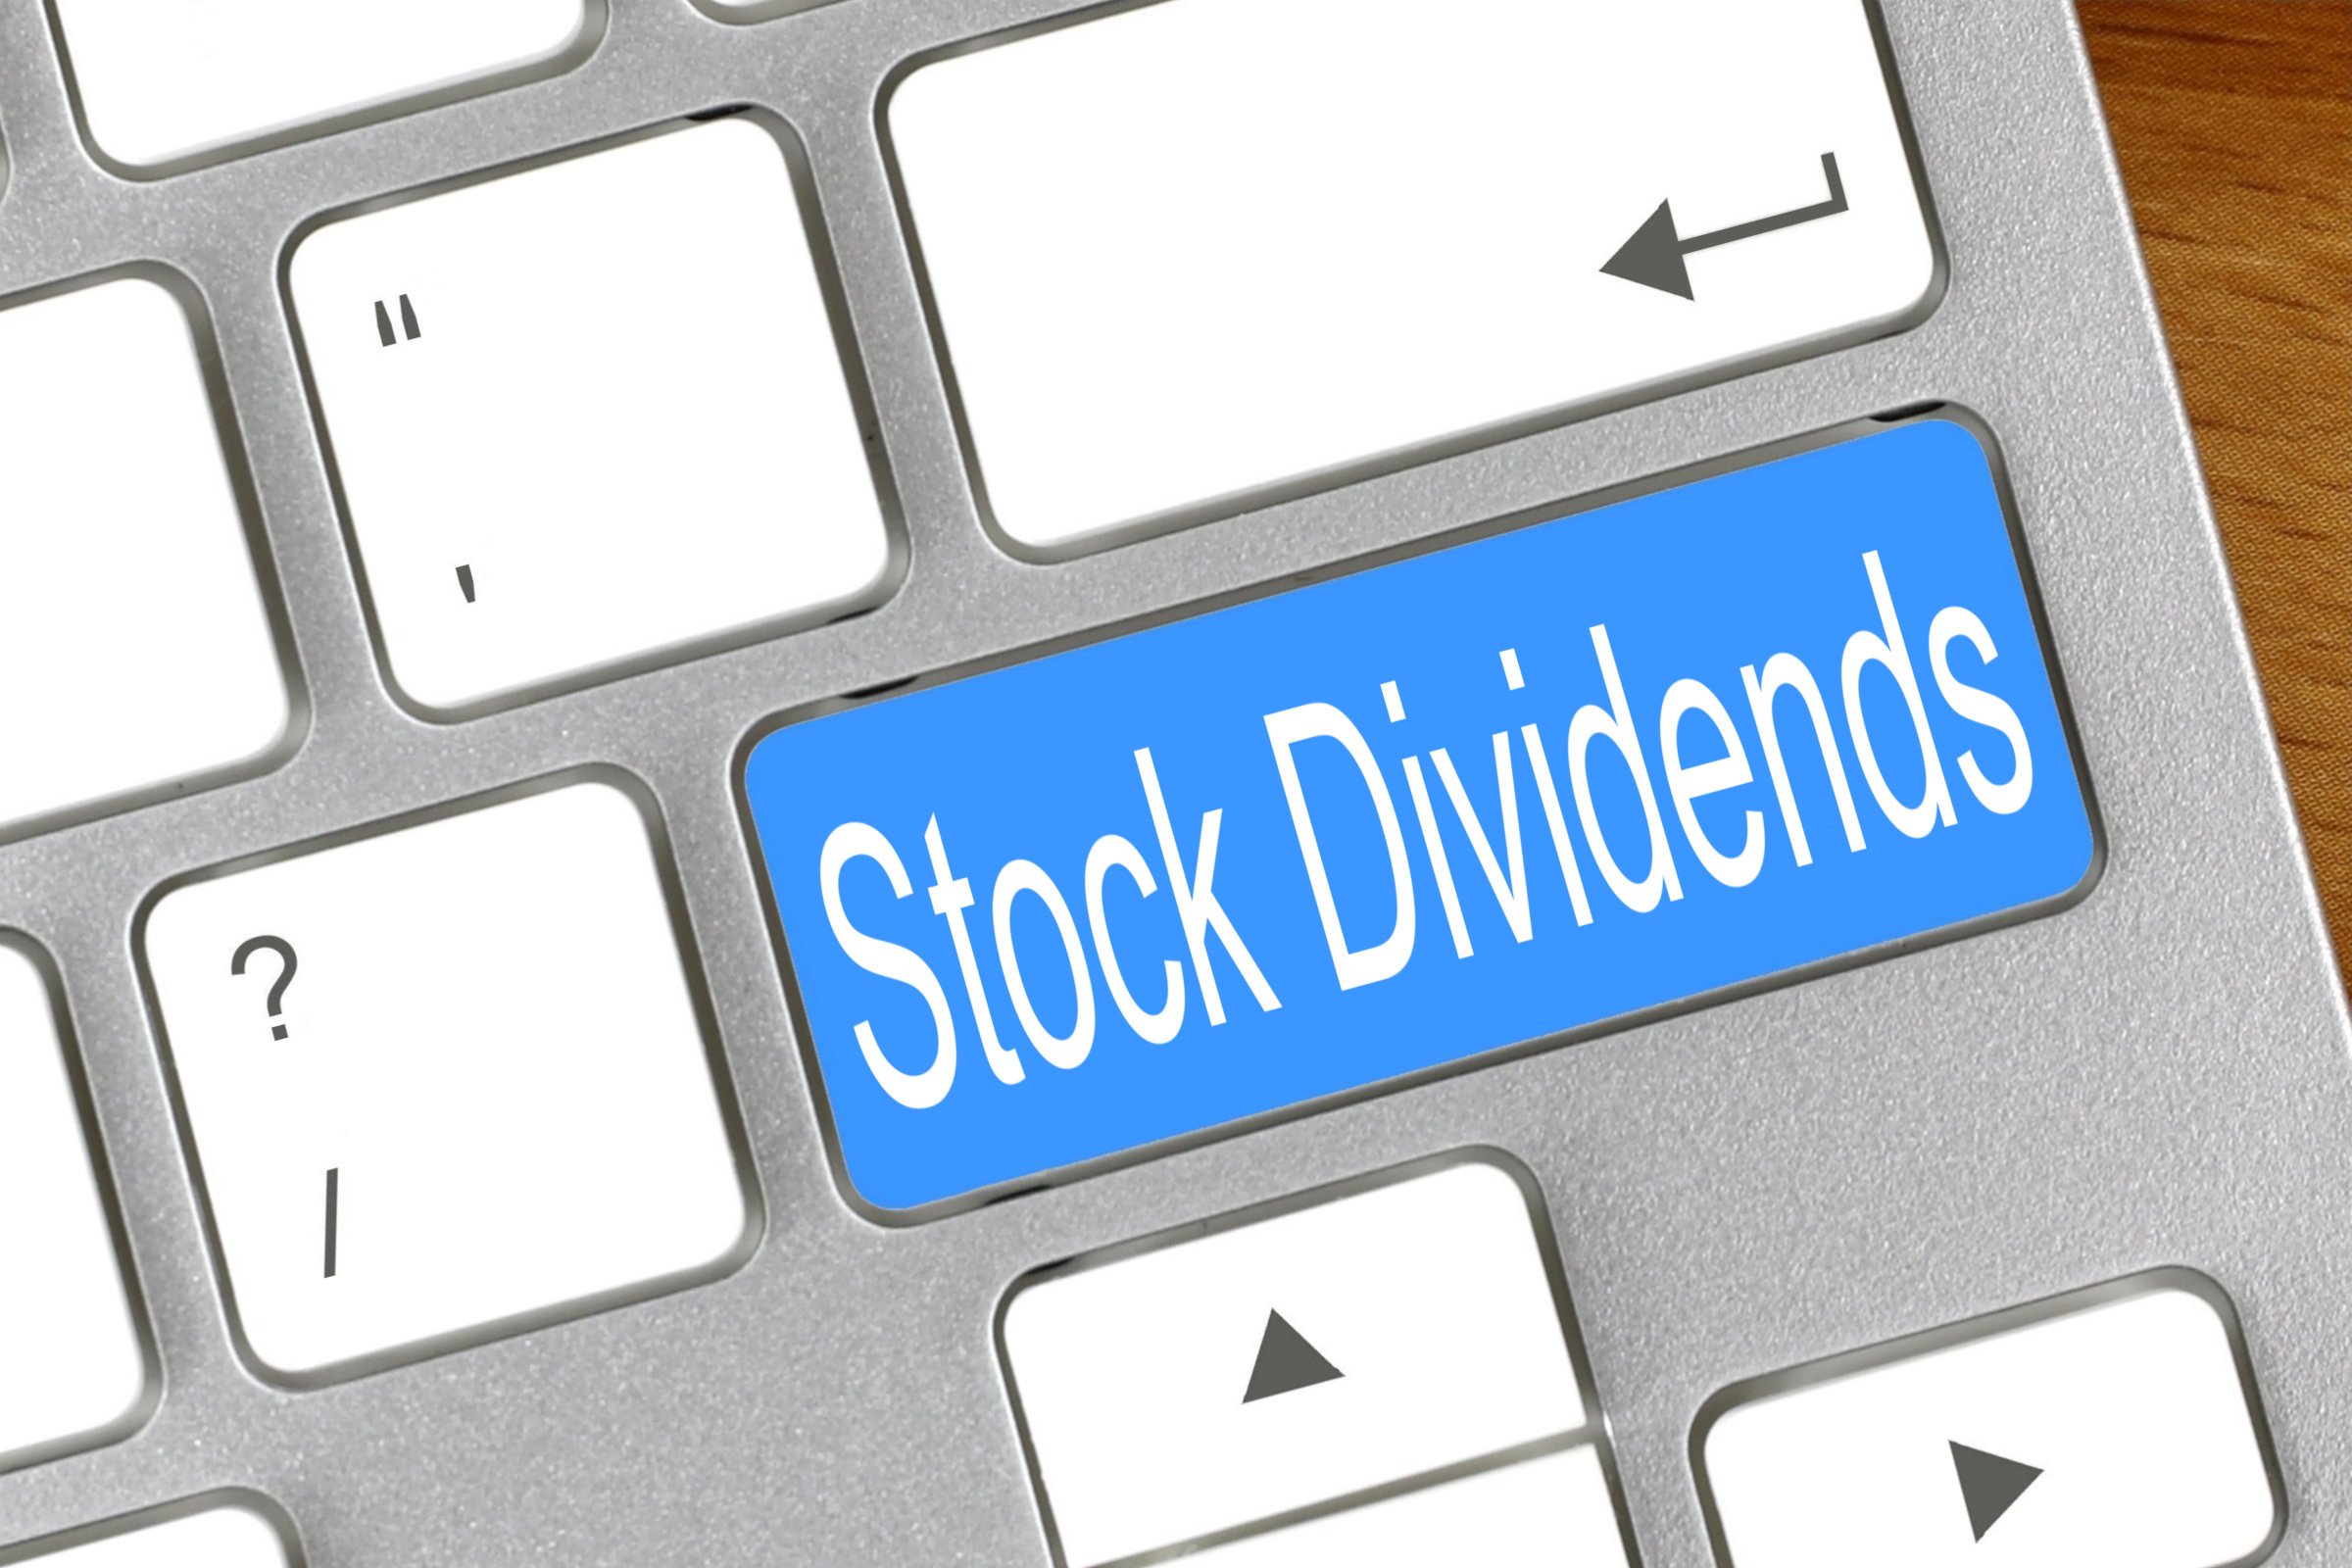 stock dividends